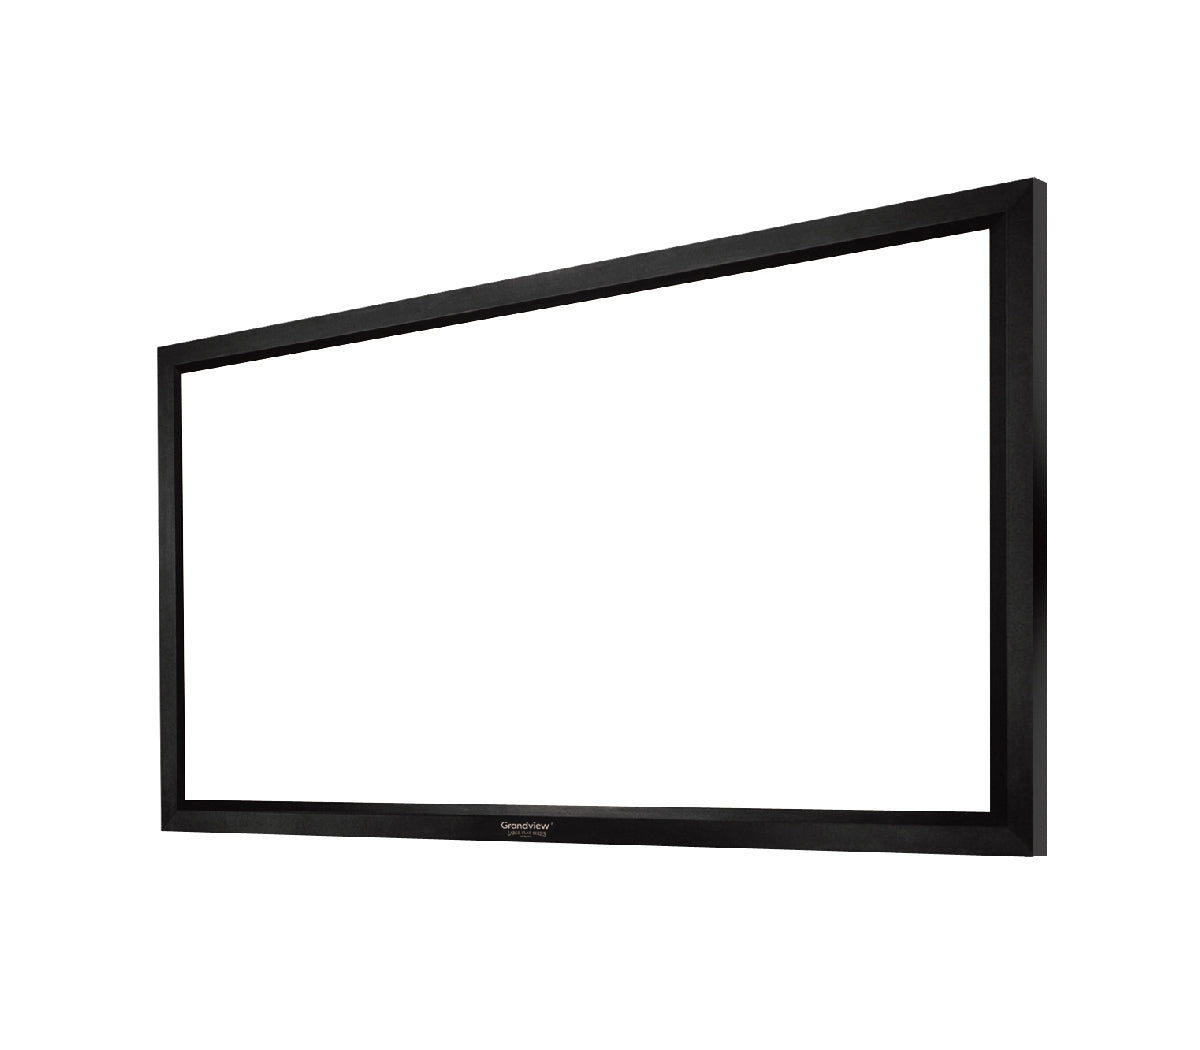 Grandview Ultimate Series Perm200 4:3 200" Flat Fixed Frame Screen